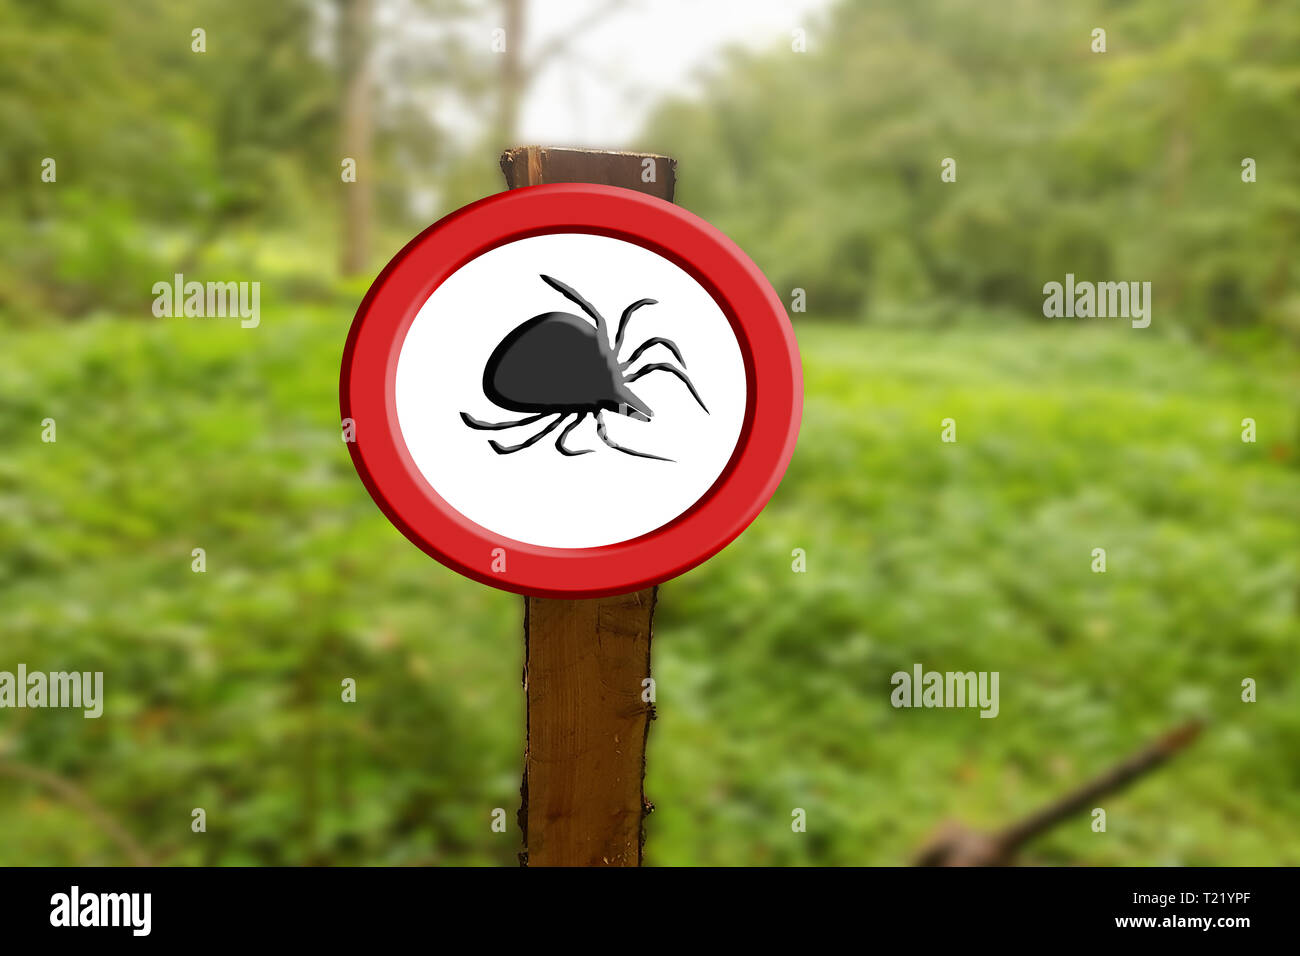 Borreliose and tick warning, round red warning sign with tick symbol. Stock Photo